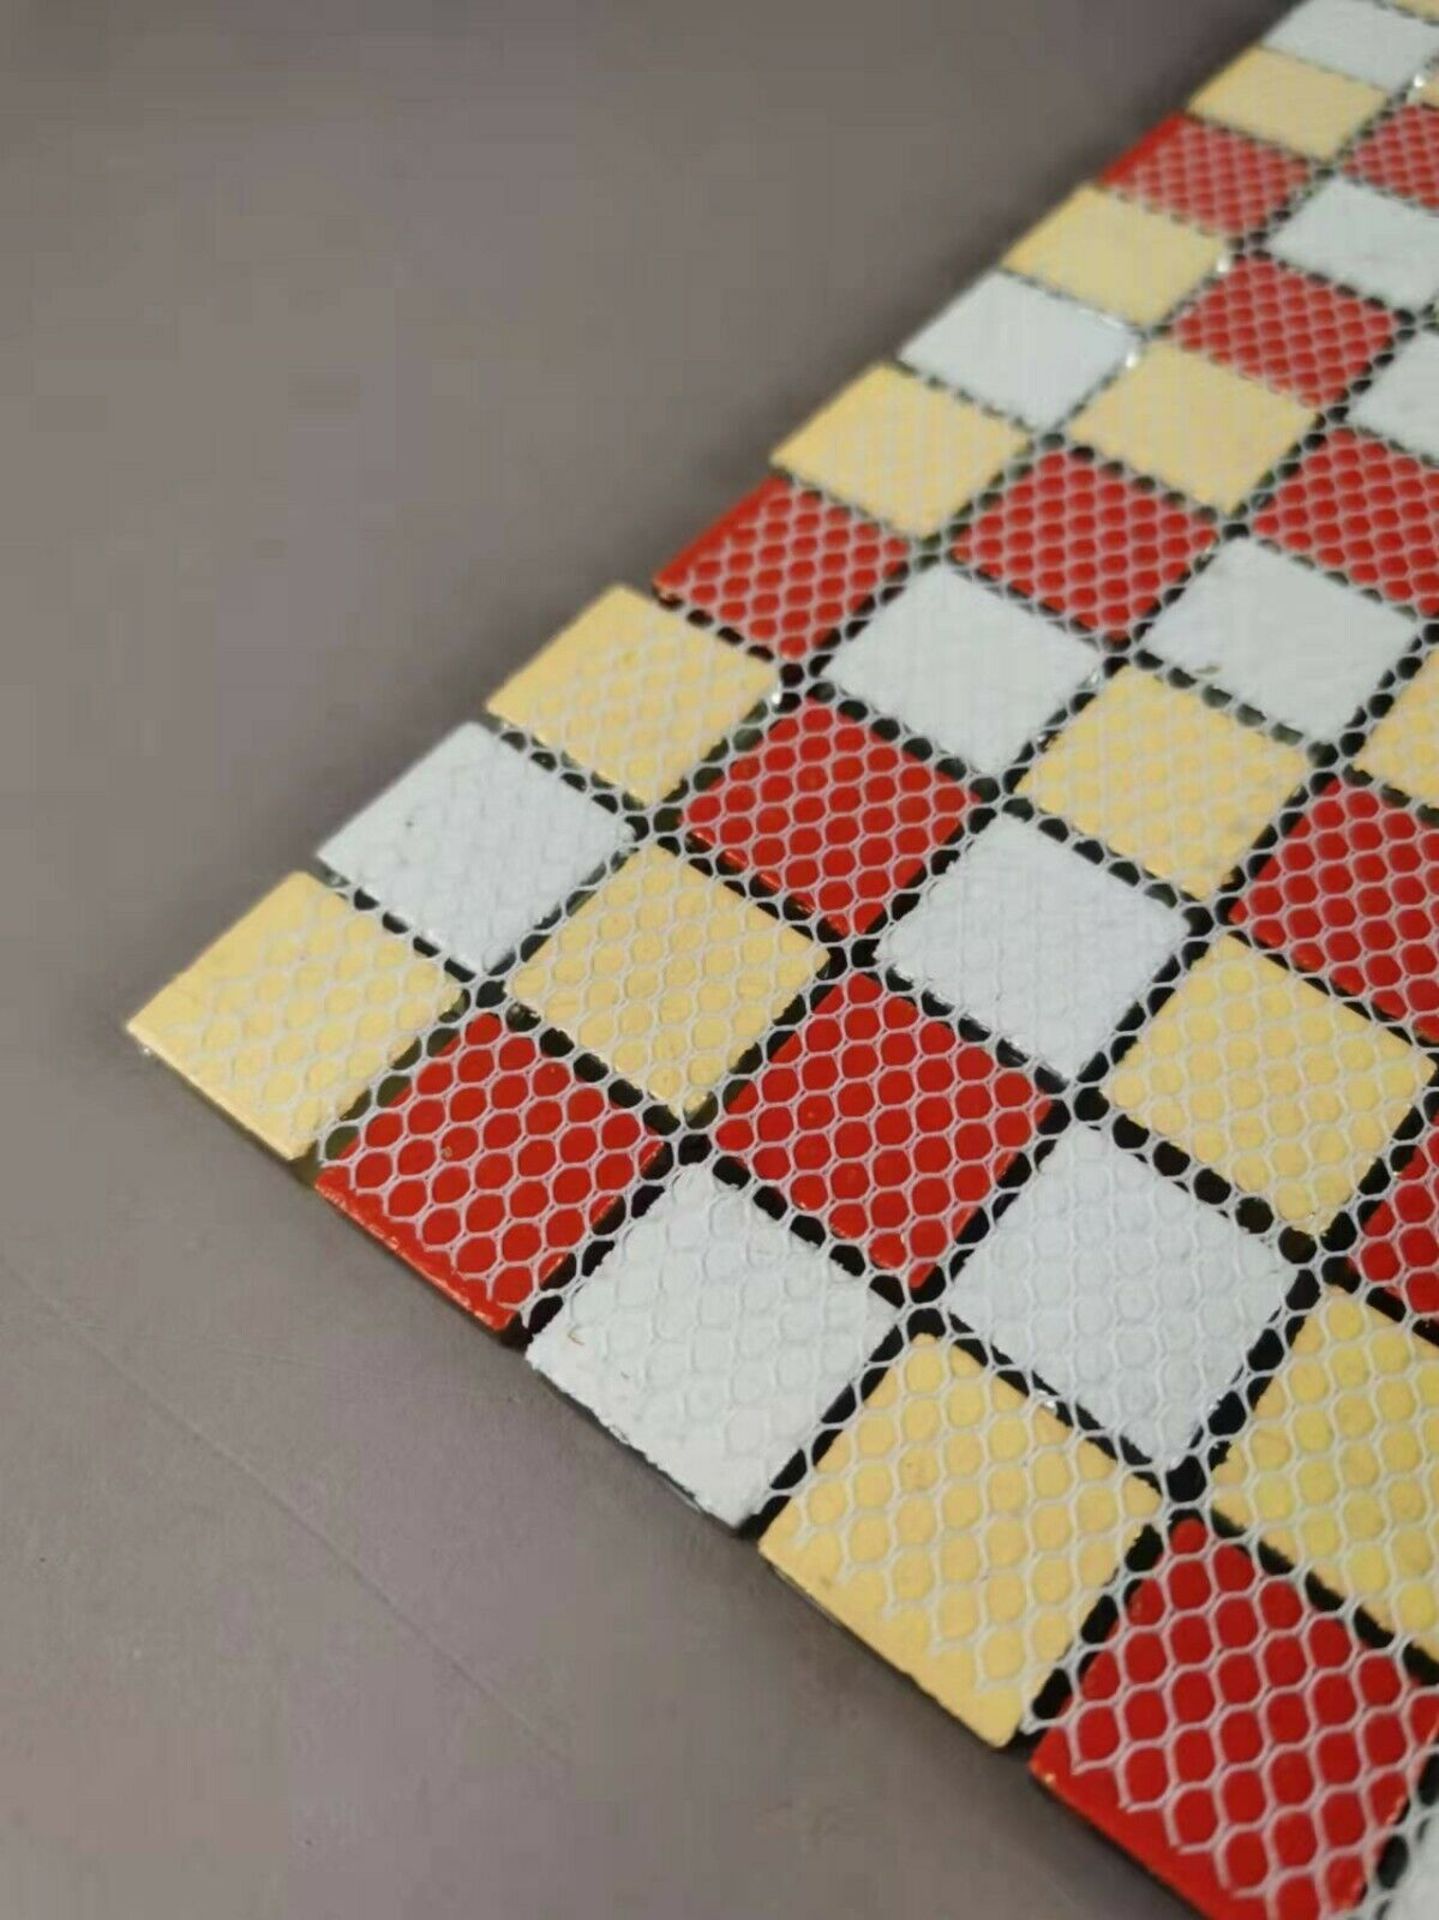 5 Square Metres - High Quality Glass/Stainless Steel Mosaic Tiles - Image 2 of 4